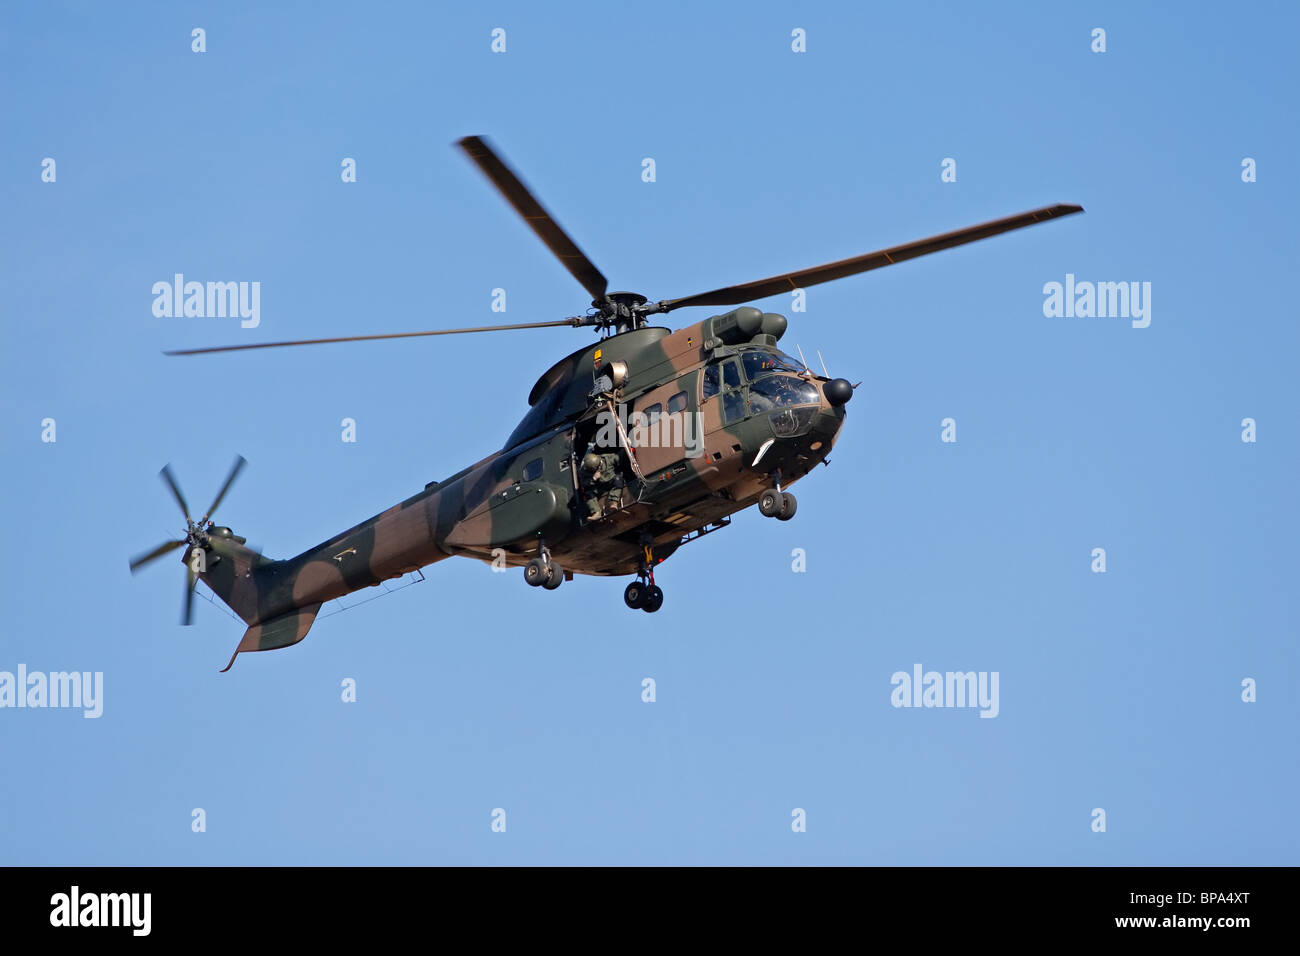 A camouflaged military helicopter in flight Stock Photo